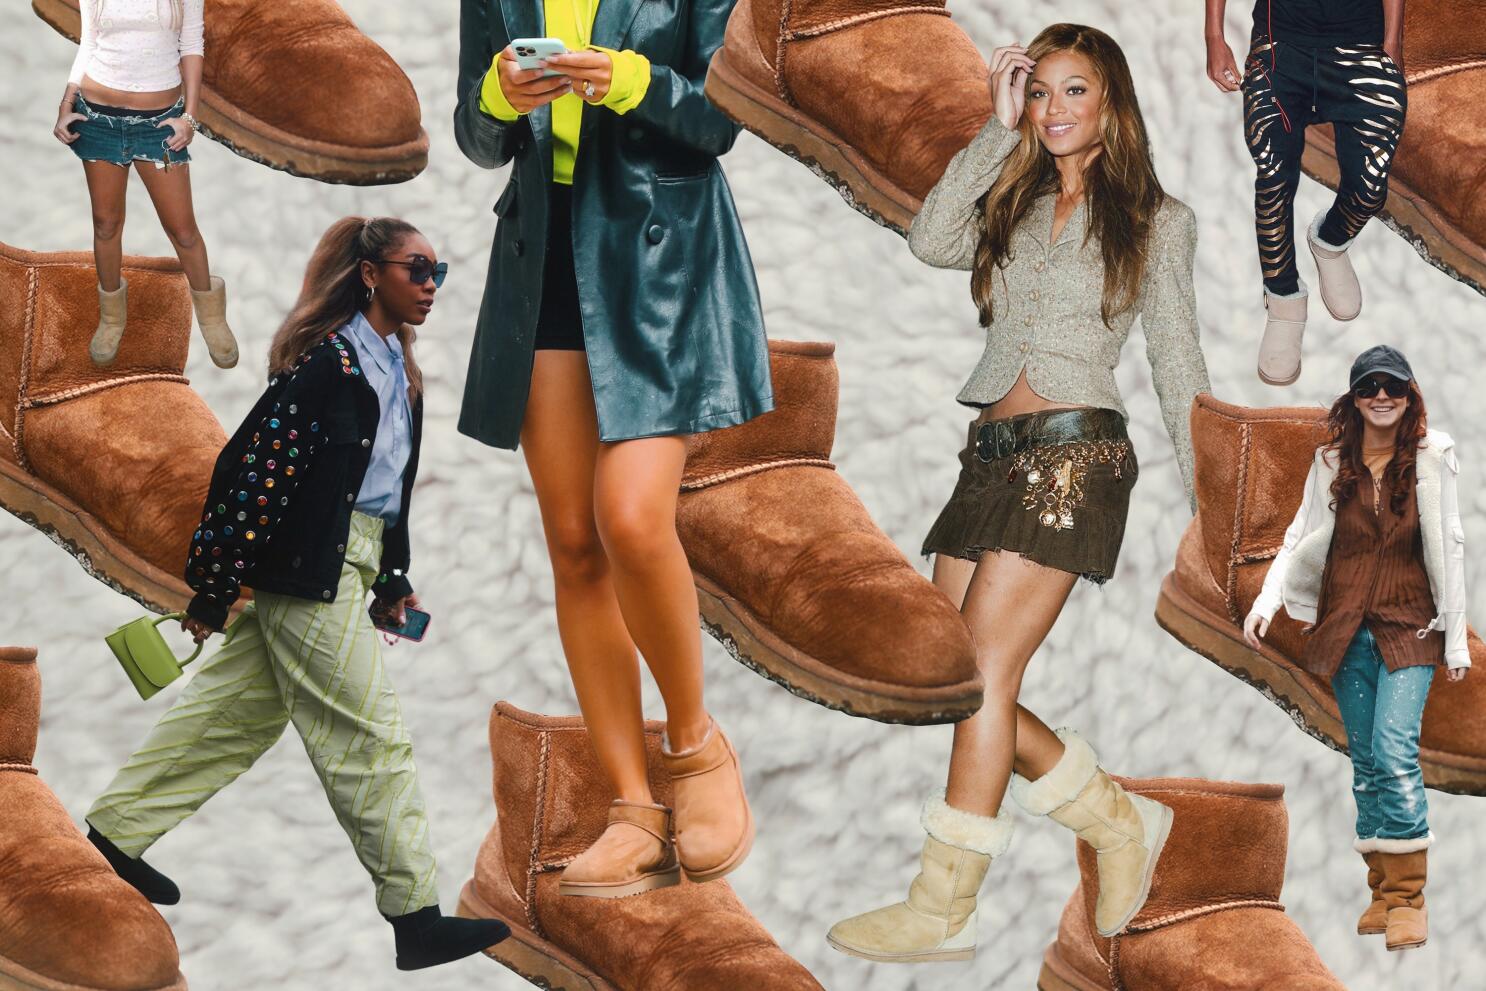 L.A. fashion trend analysis: It's time to reconsider Uggs - Los Angeles